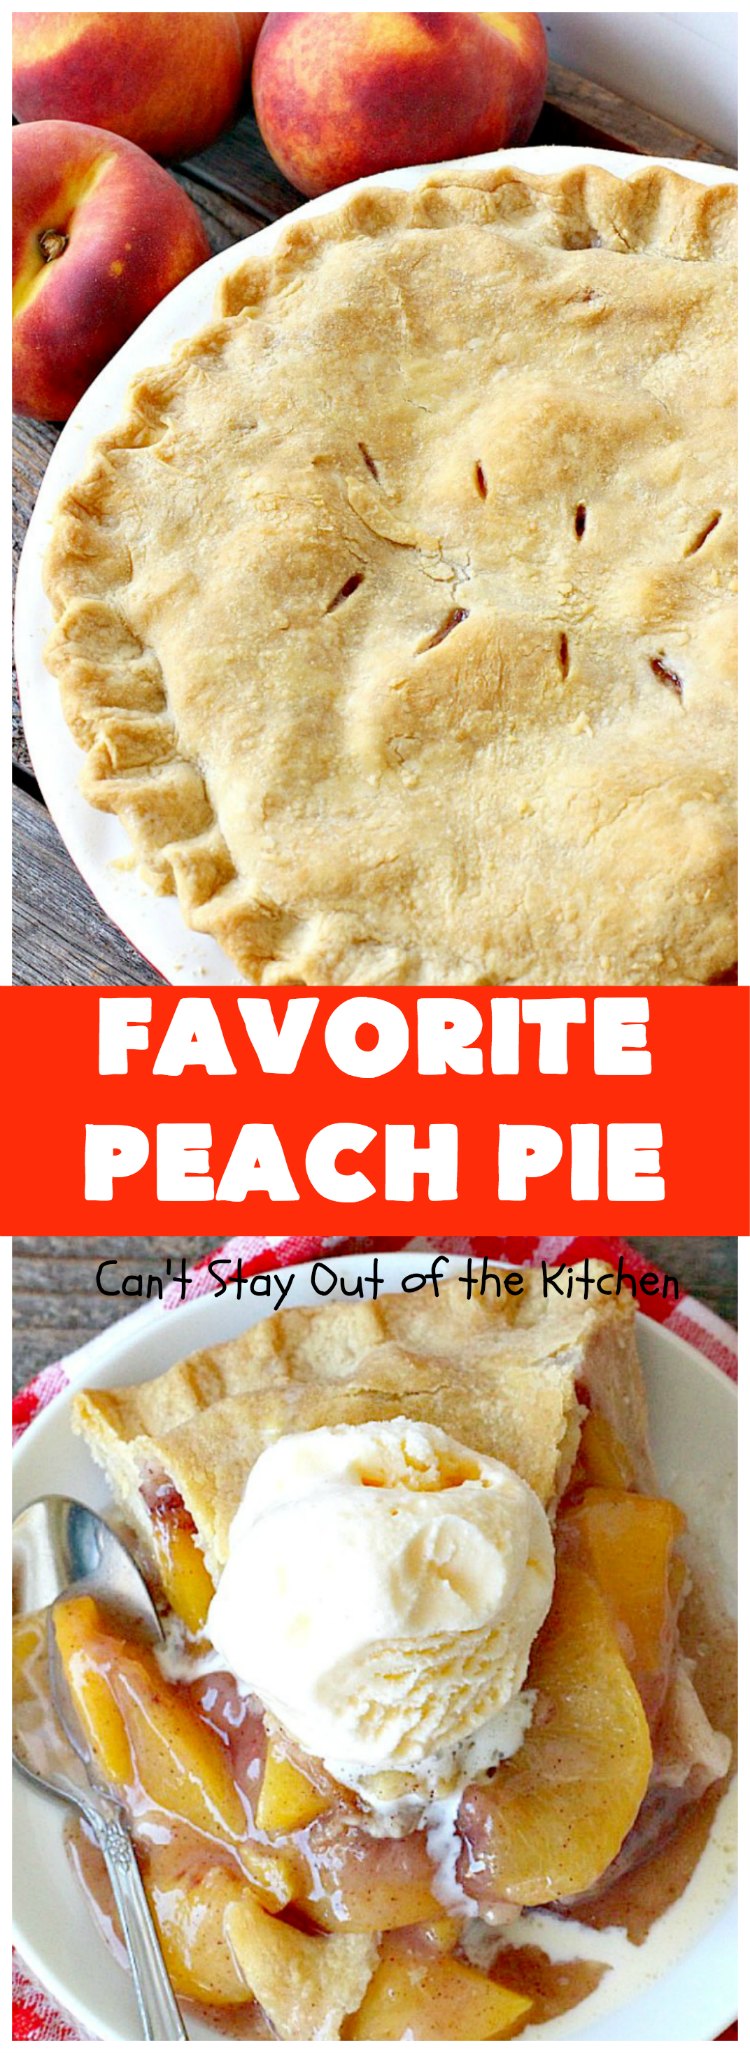 Mom S Peach Pie Can T Stay Out Of The Kitchen